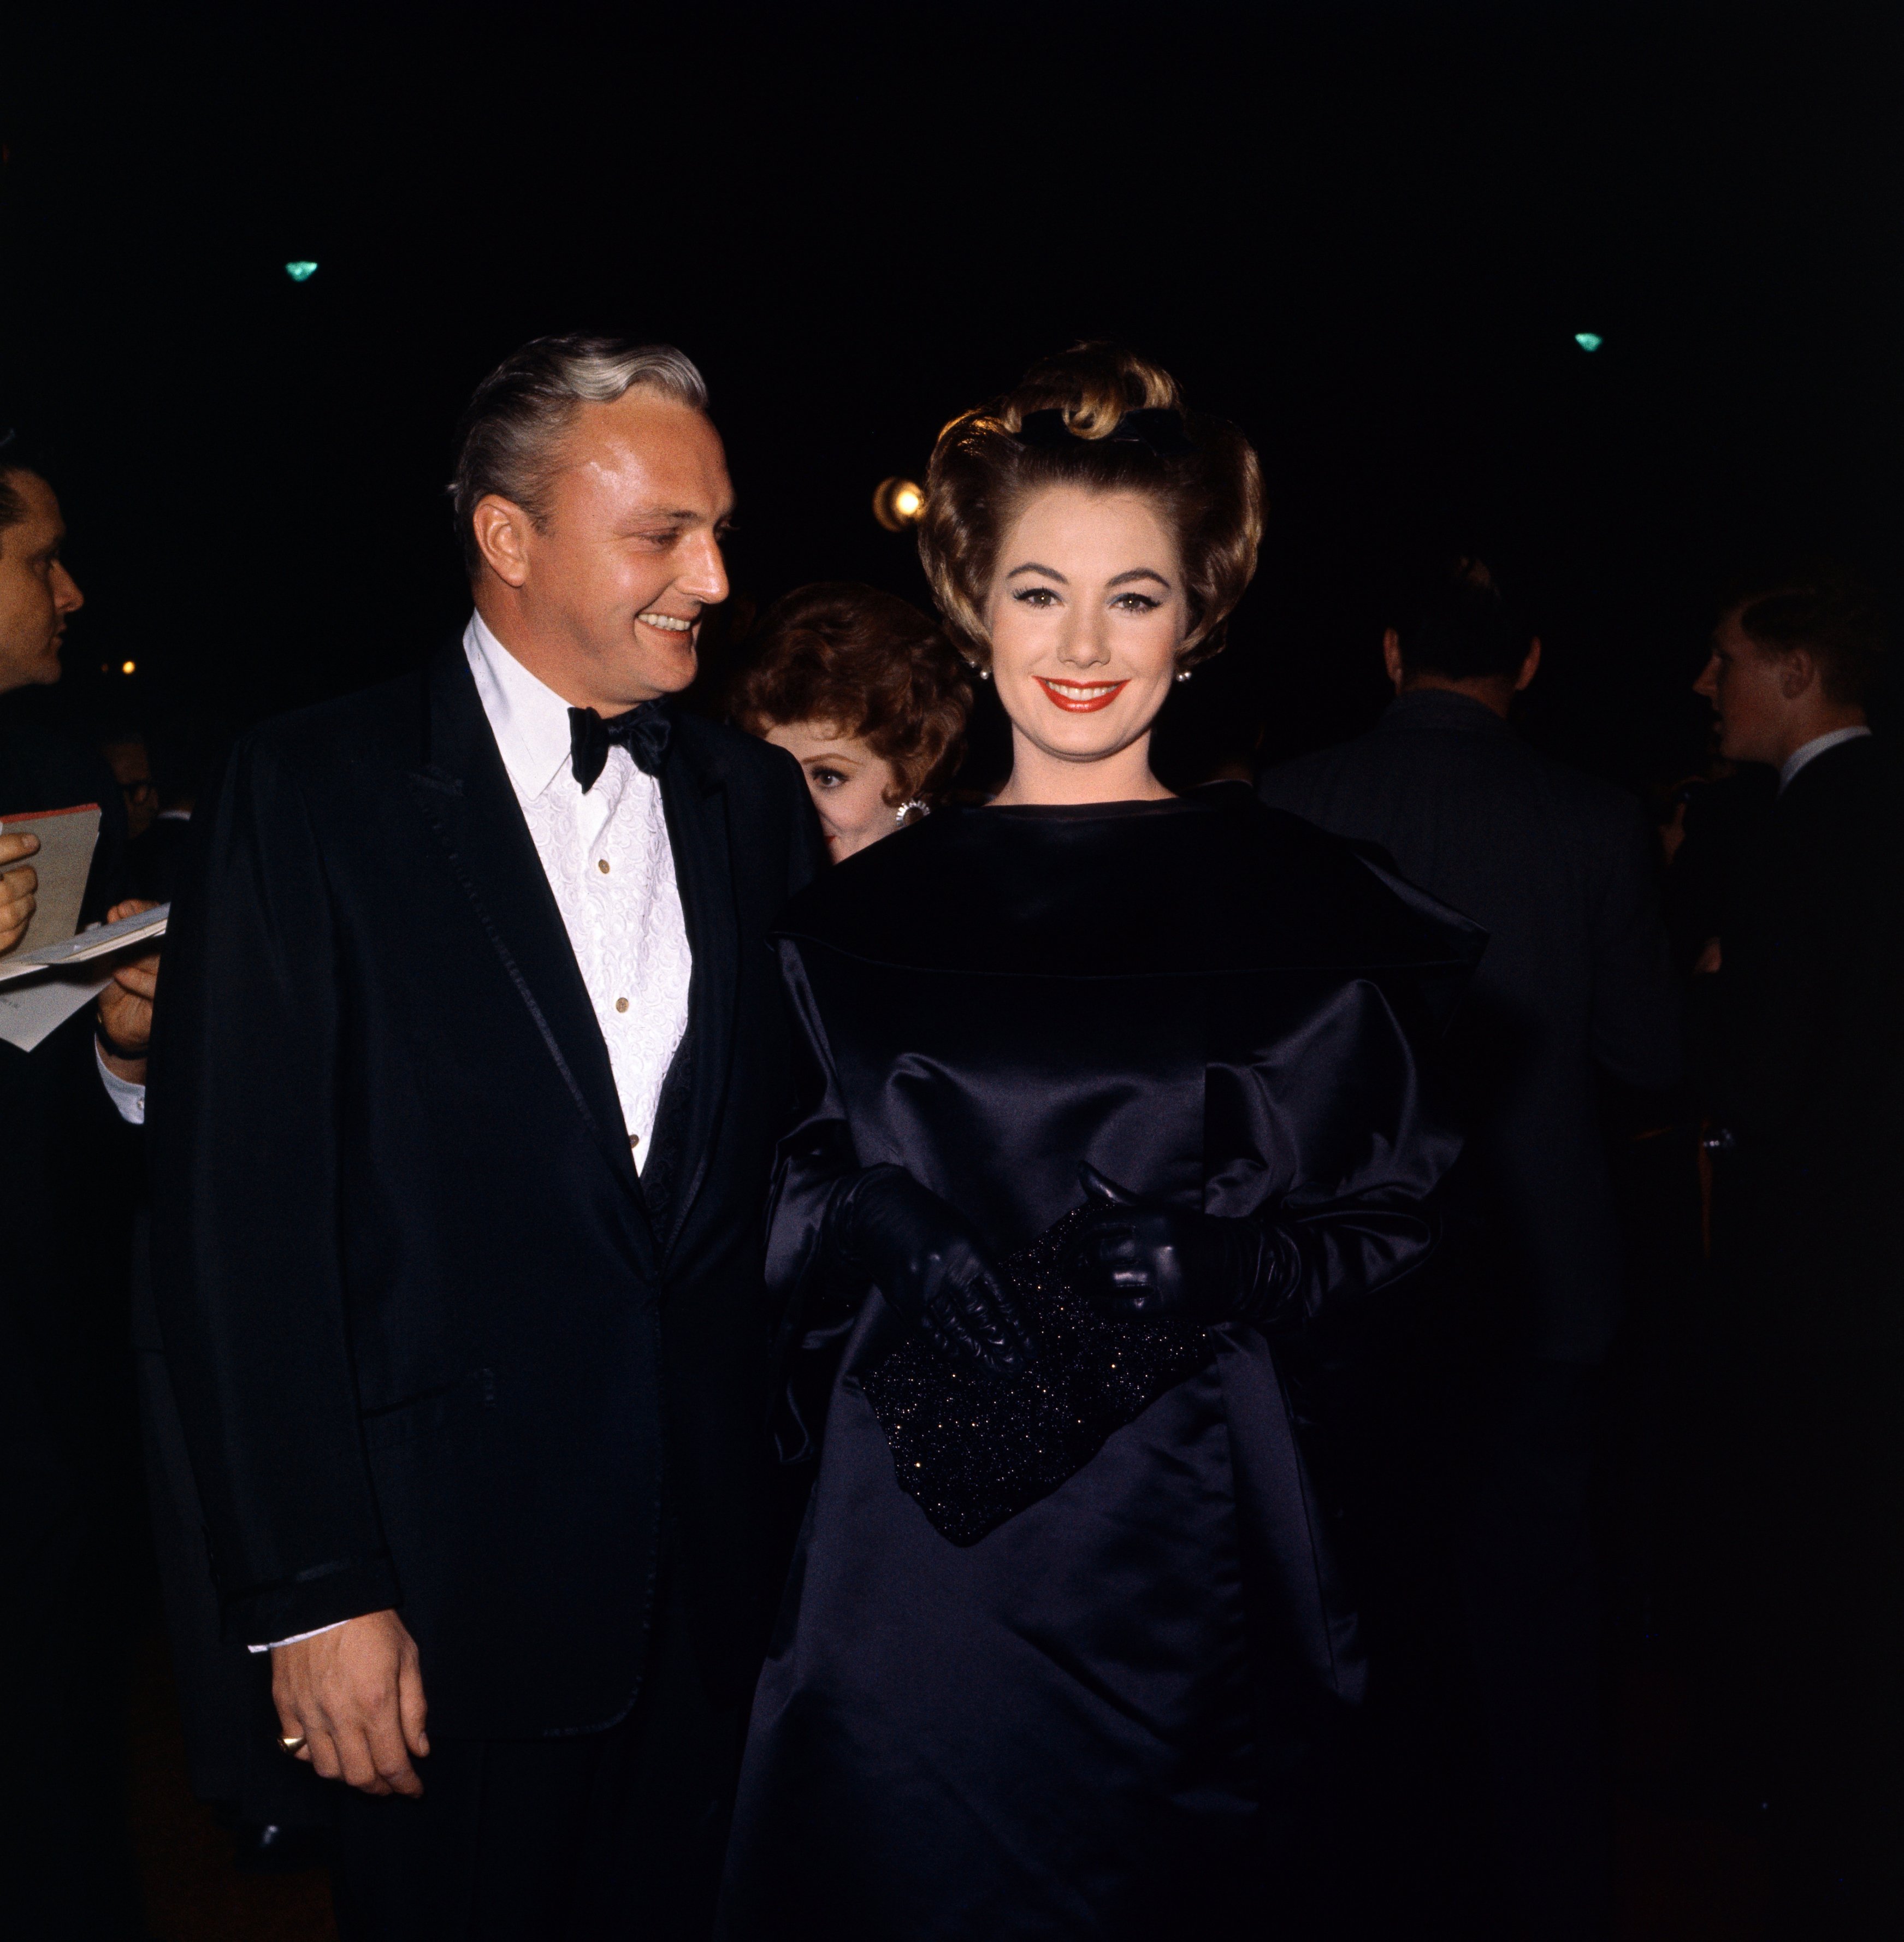 Shirley Jones and Jack Cassidy attending the Academy Awards, 1962 | Source: Getty Images